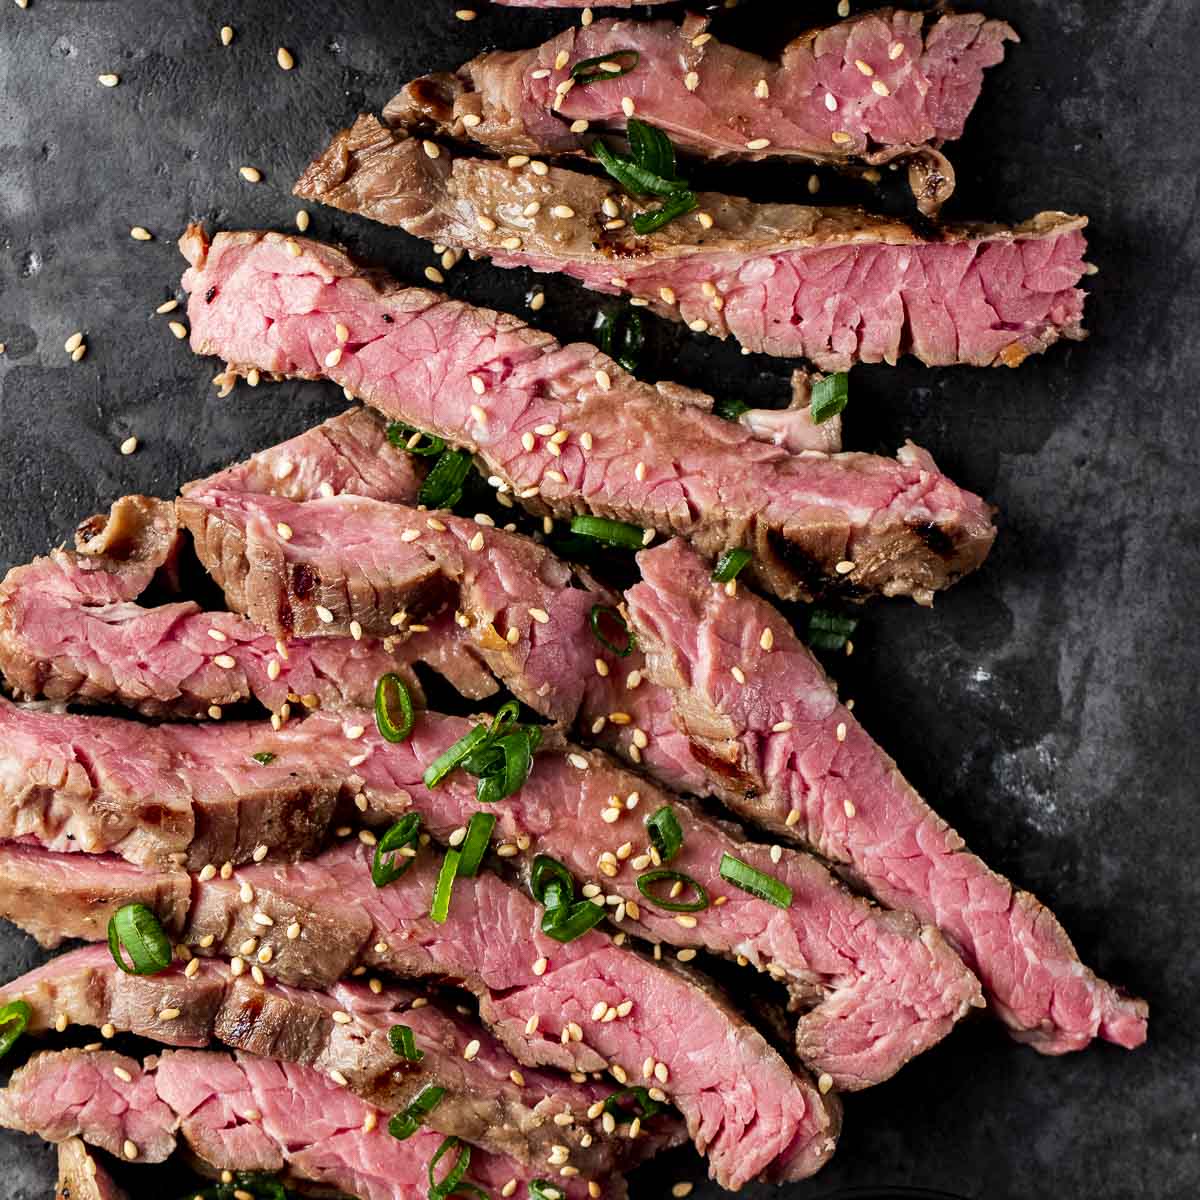 https://www.wenthere8this.com/wp-content/uploads/2021/03/sous-vide-skirt-steak-FEATURED.jpg